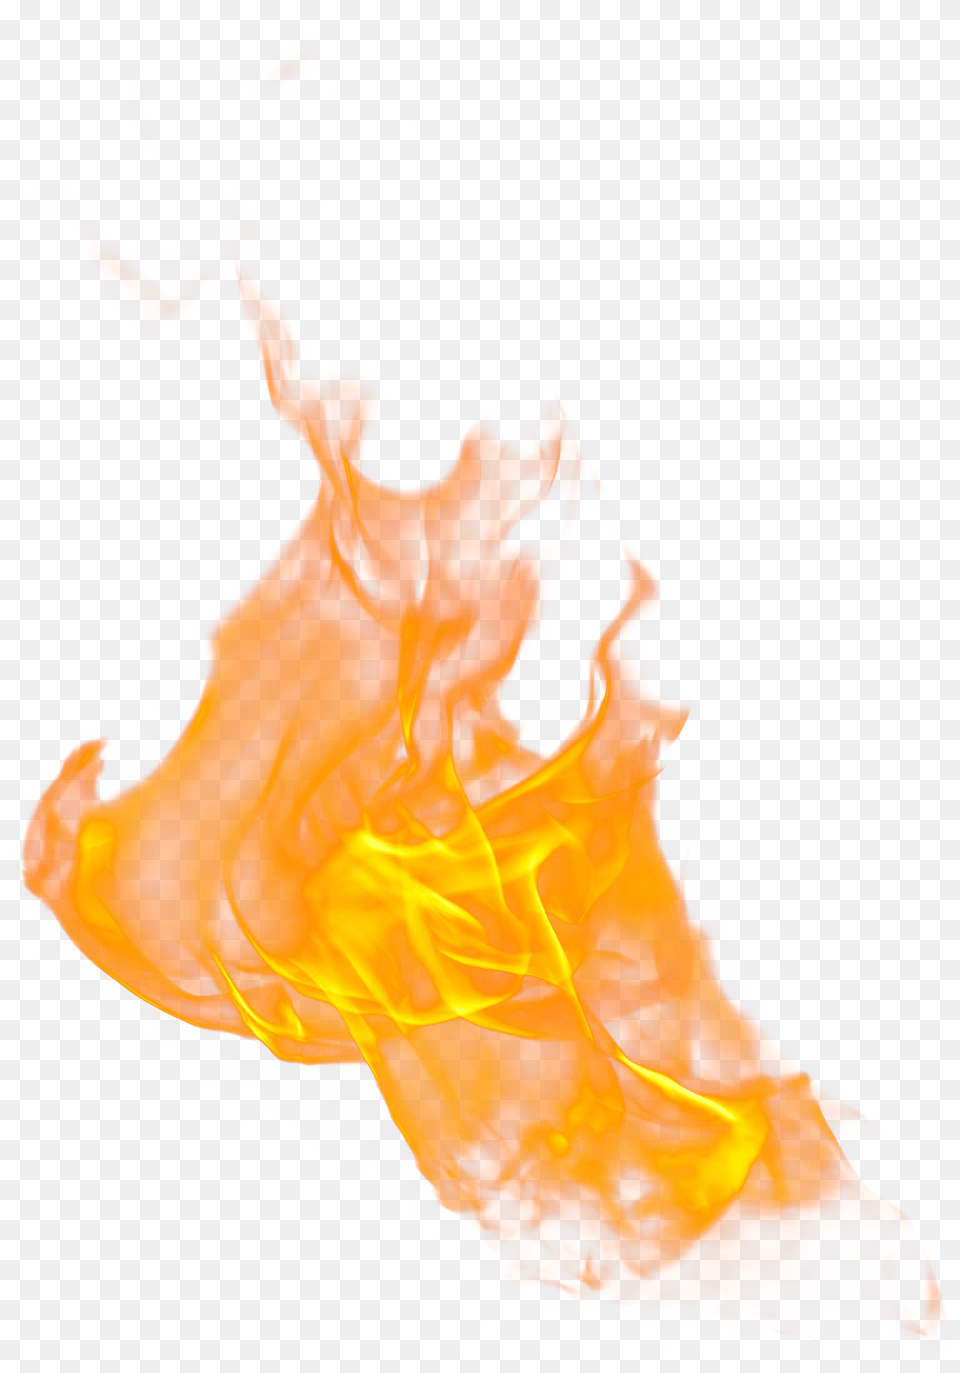 Fire Flame Image For Download Portable Network Graphics, Mountain, Outdoors, Nature, Wedding Free Transparent Png